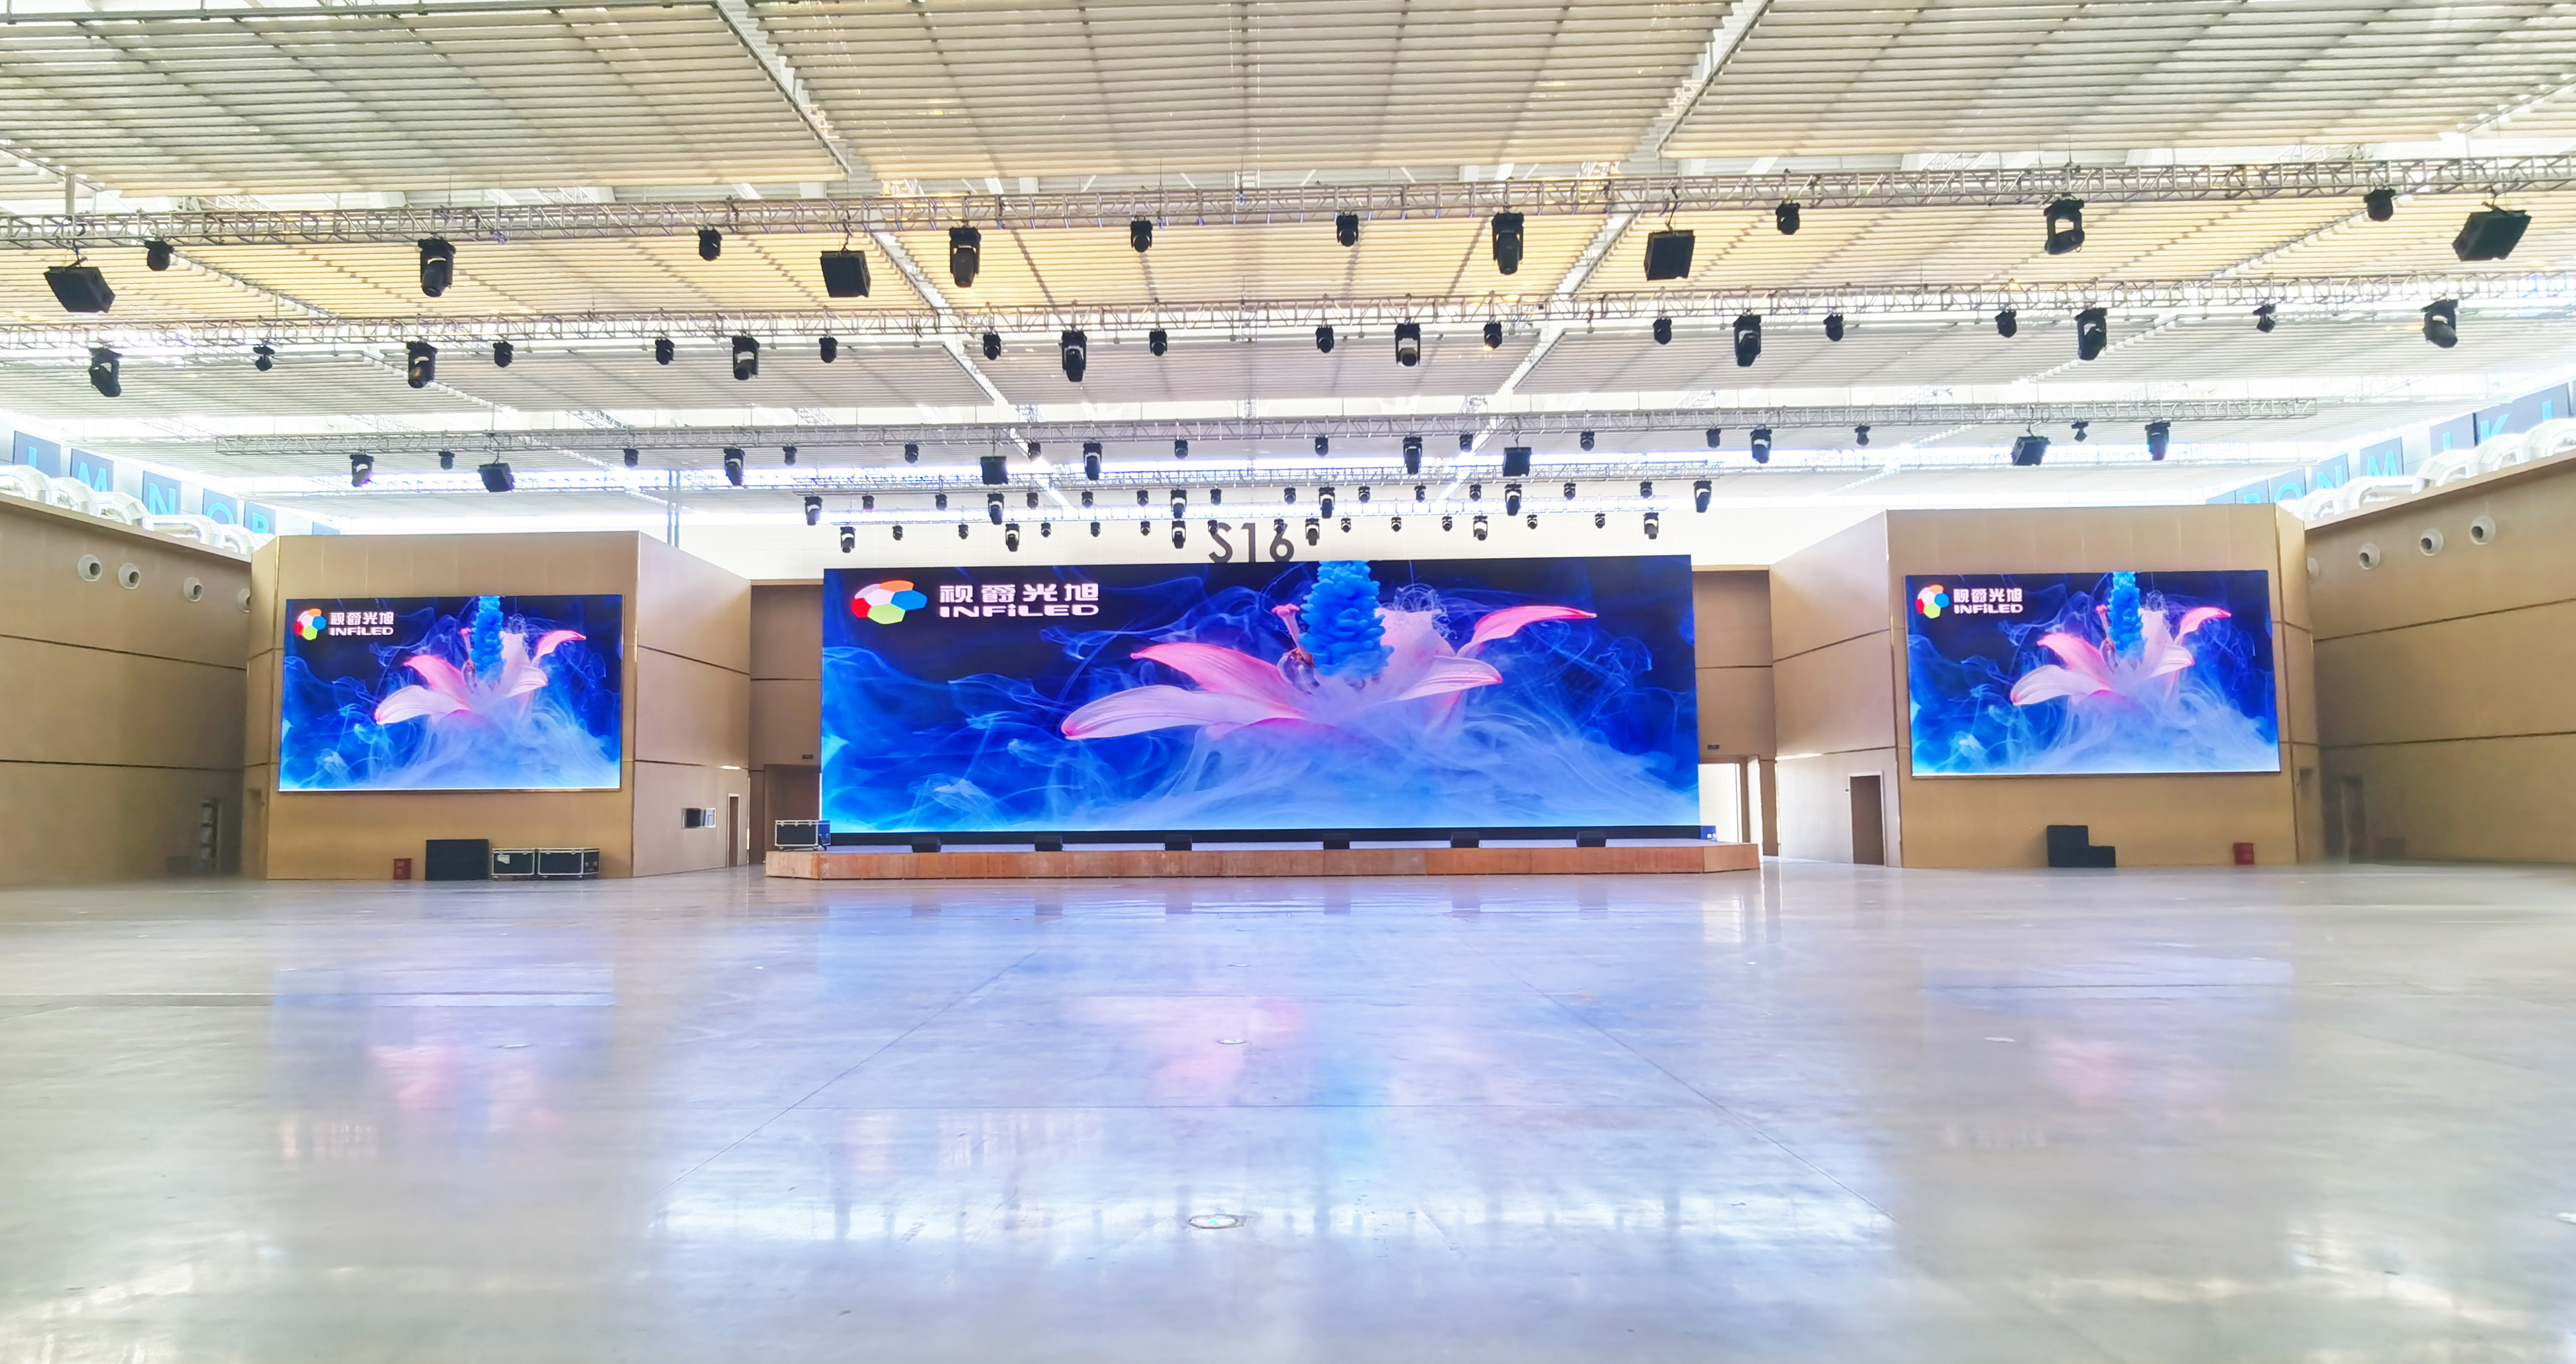 The National Convention and Exhibition Center (Tianjin) chose INFiLED LED Displays for its Conference Hall